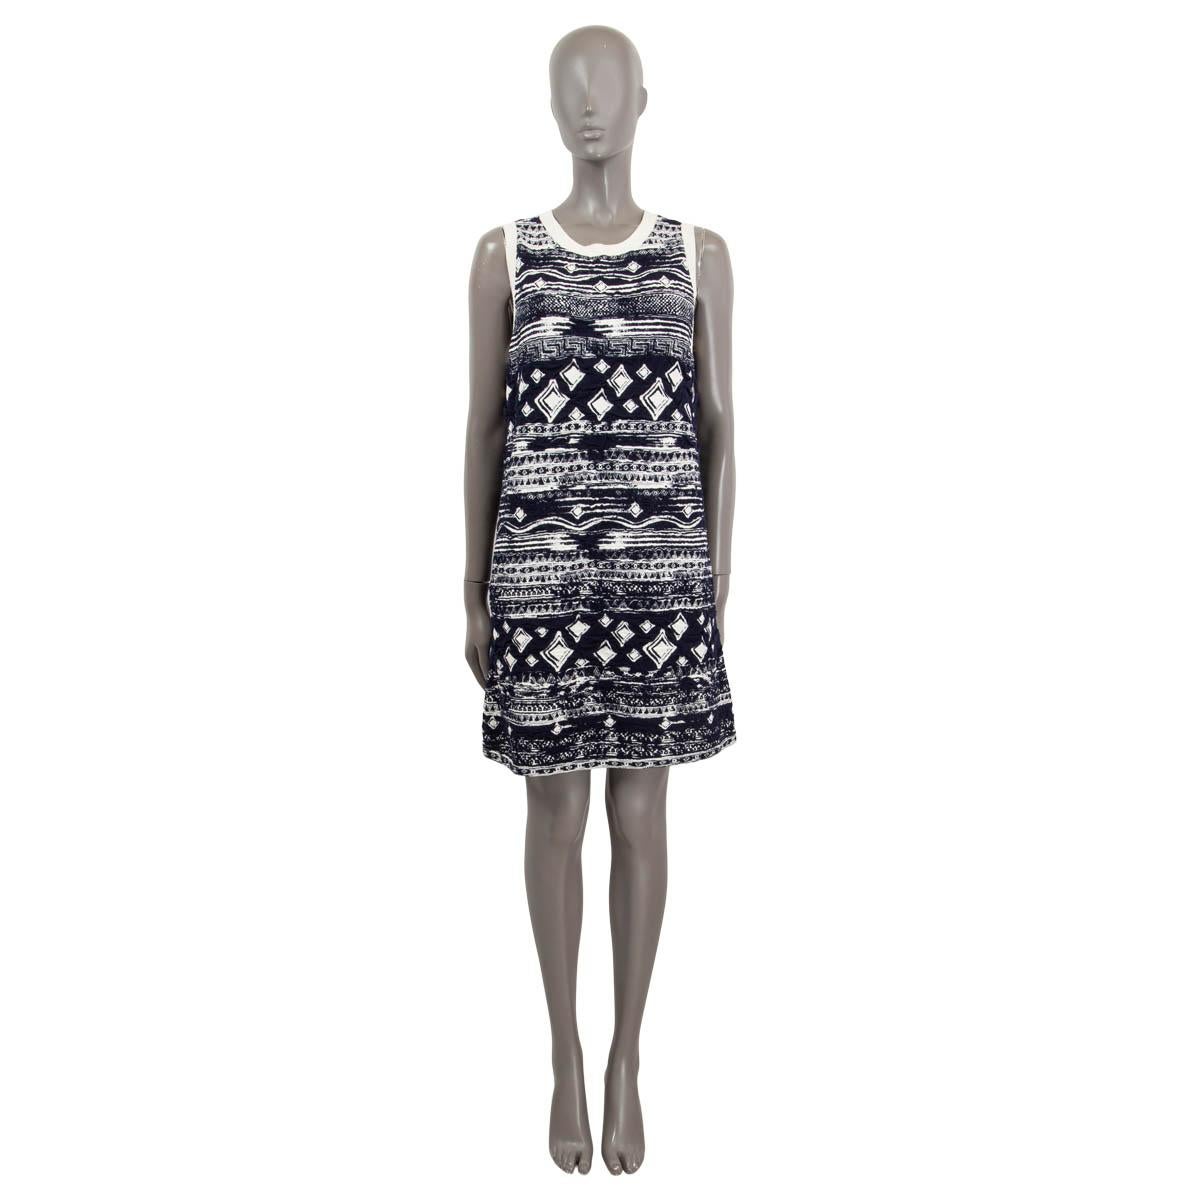 100% authentic Chanel sleeveless mini knit dress in navy blue and ivory cotton (50%), viscose (40%) and polyester (10%). Unlined. Has been worn and is in excellent condition.

2018 Paris-Greece Cruise

Measurements
Model	Chanel18C
Tag